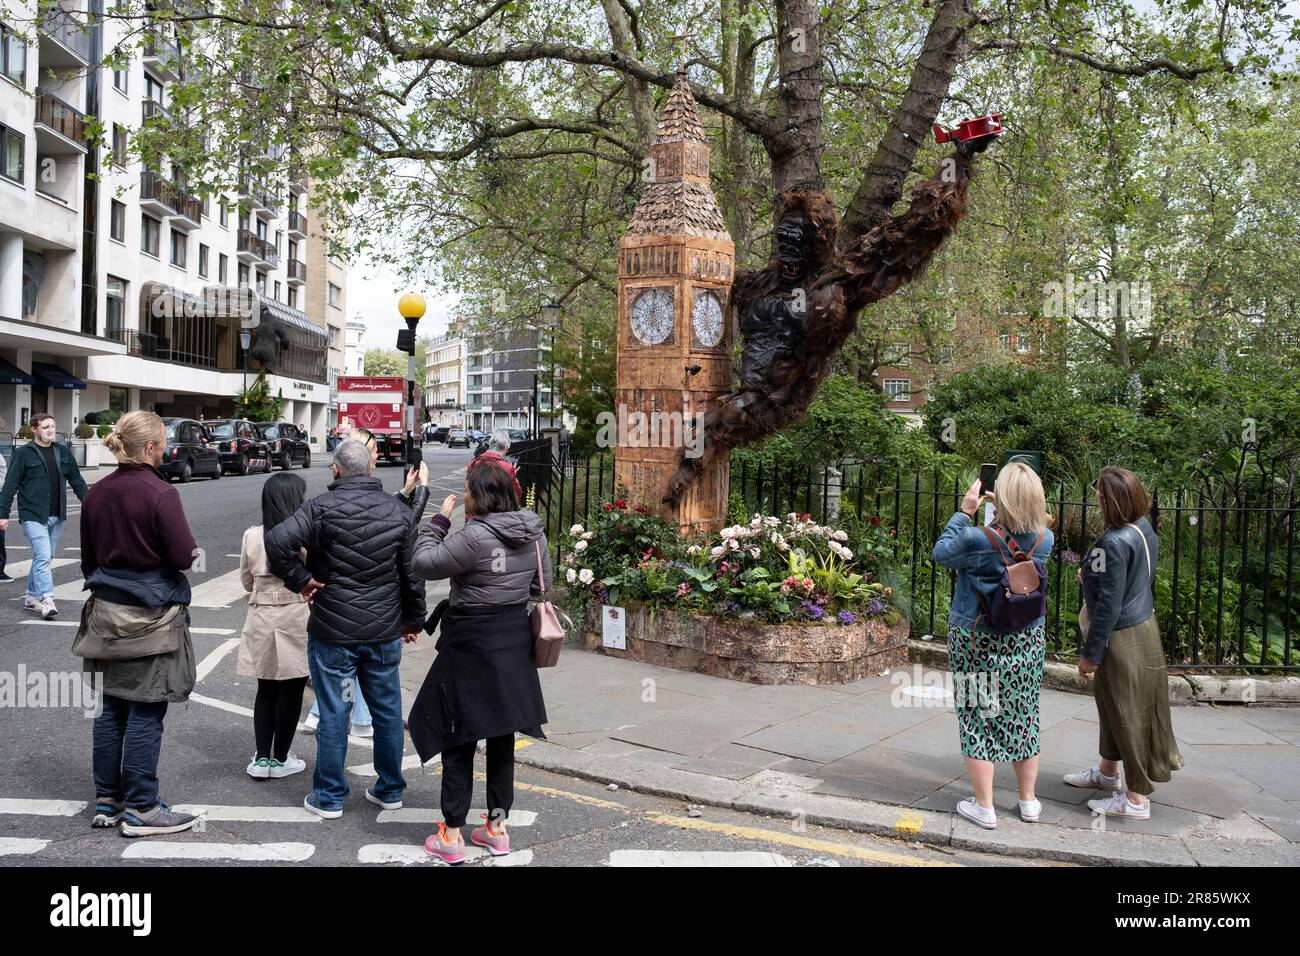 People in Kensington and Chelsea out to see the various floral displays for Chelsea Flower Show on 23rd May 2023 in London, United Kingdom. Here in Cadogan Place Park, a giant display featuring King Kong scaling Big Ben draws much interest. Chelsea is one of the principal areas for exclusive, luxury goods in West London. It is known as a district where the rich and wealthy shop. The RHS Chelsea Flower Show, formally known as the Great Spring Show, is a garden show held for five days in May by the Royal Horticultural Society. While this is a ticketed event local businesses celebrate by adorning Stock Photo